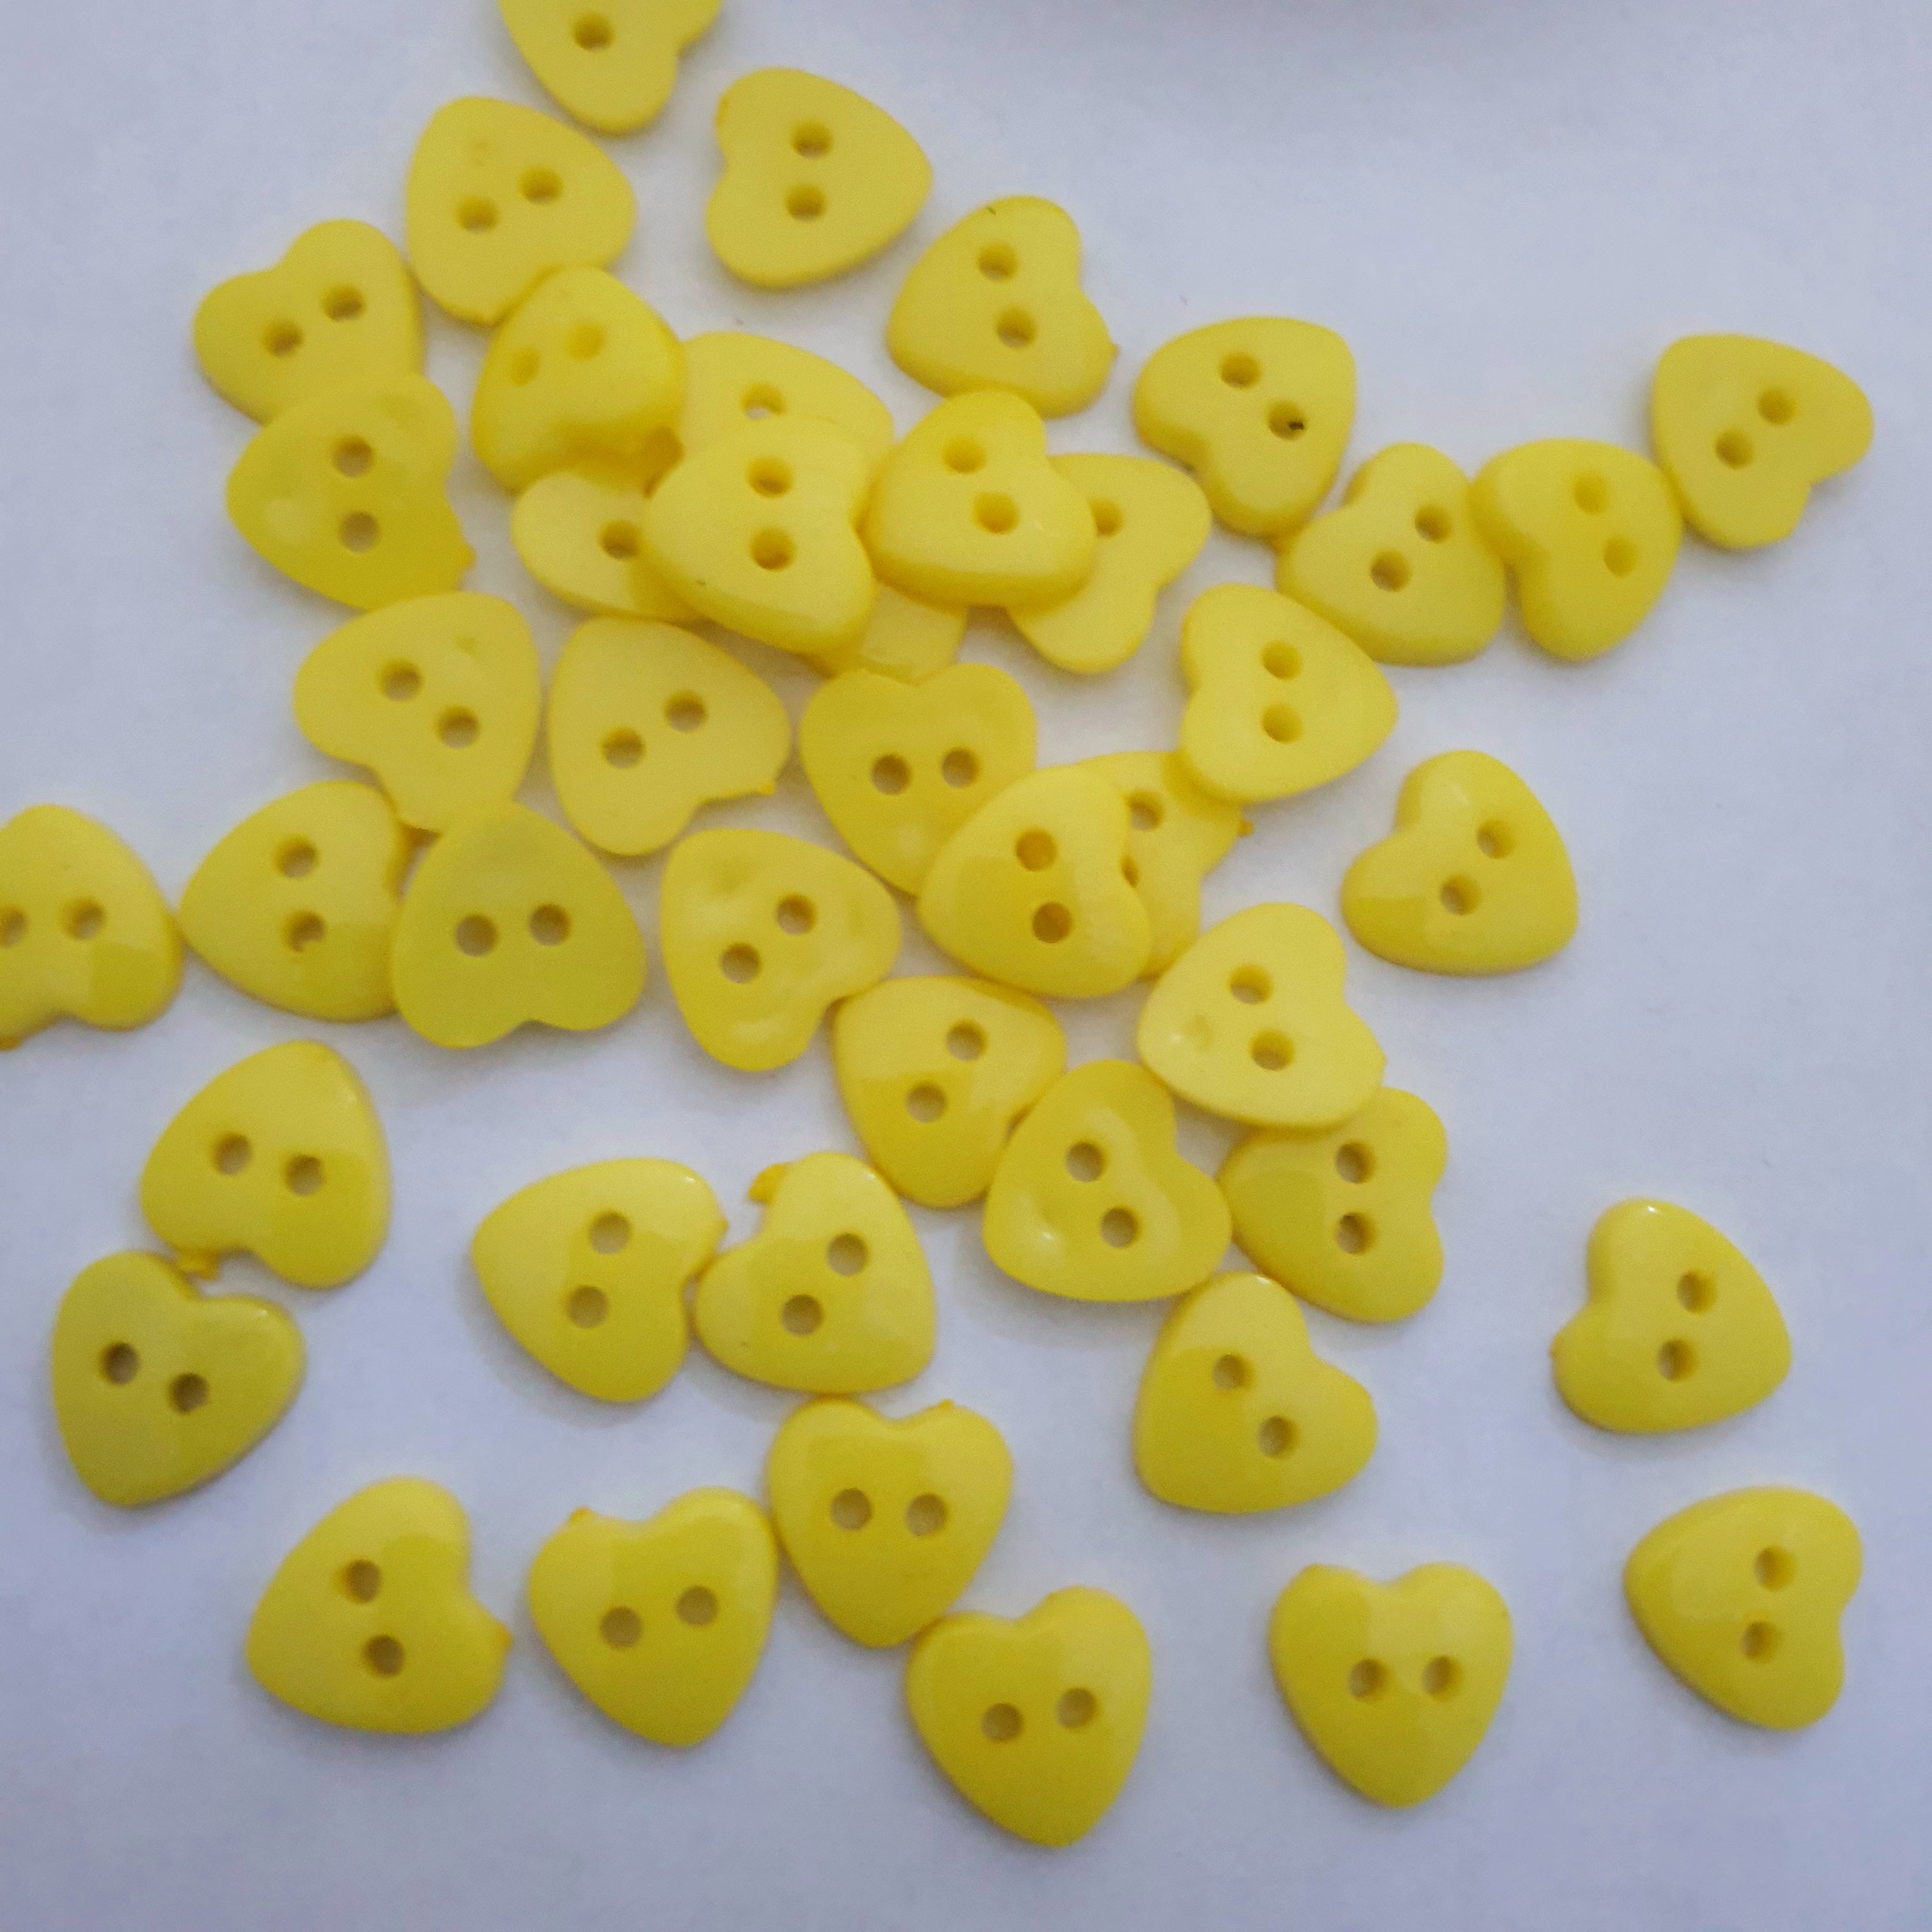 MajorCrafts 60pcs 13mm Bright Yellow Heart Shaped 2 Holes Resin Sewing Buttons